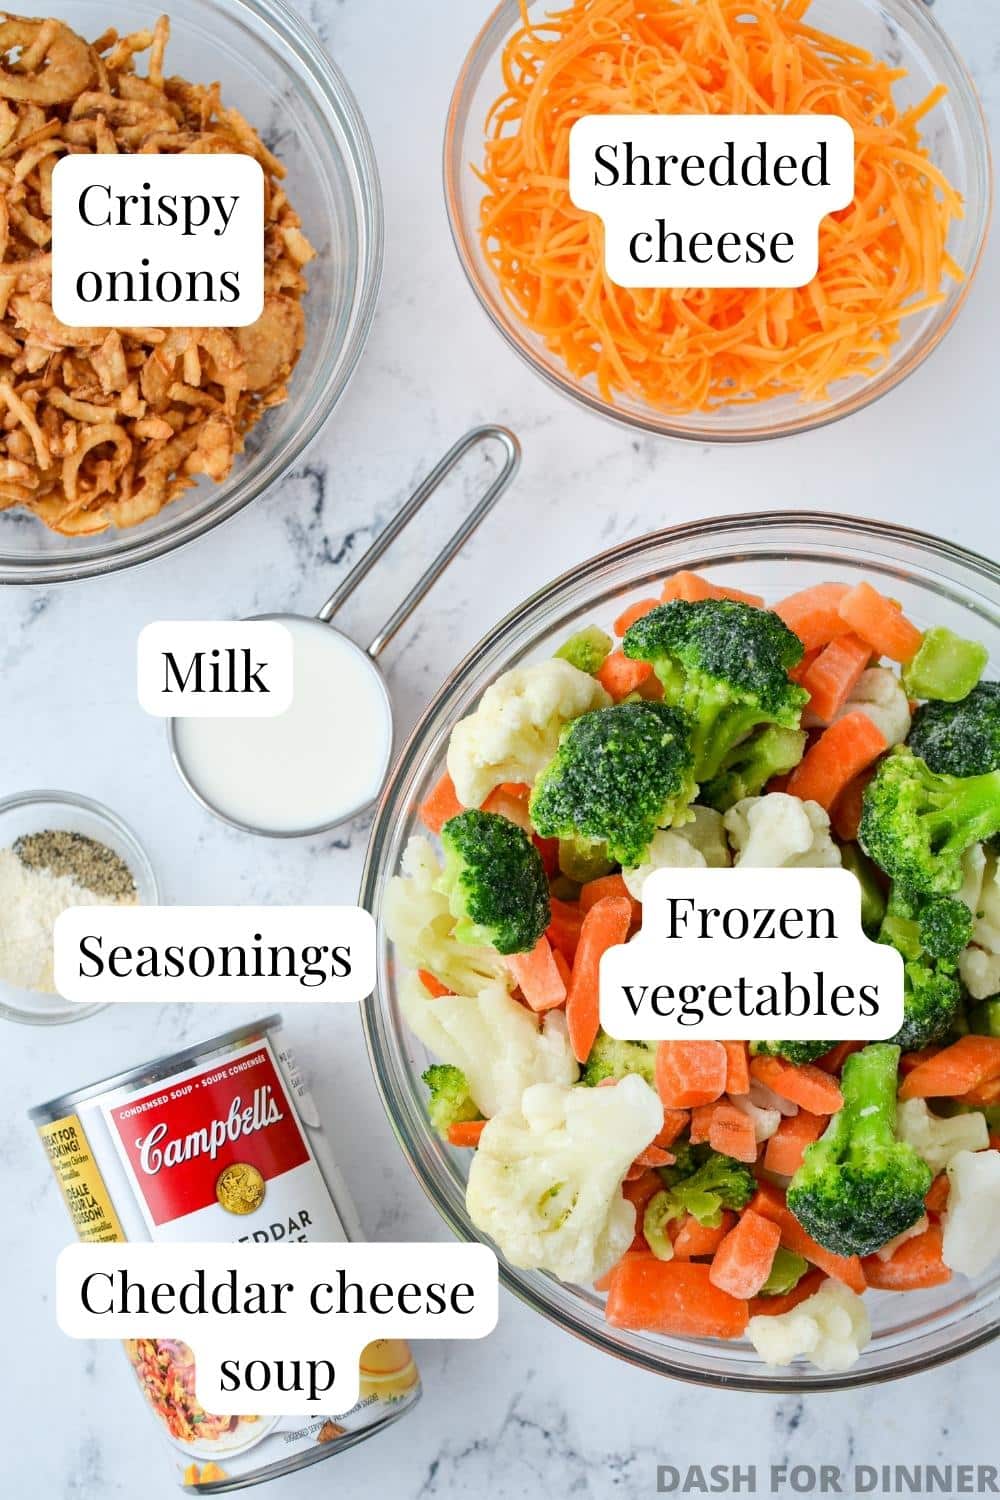 The ingredients needed to make vegetable casserole: veggies, cheese, condensed soup, etc. 